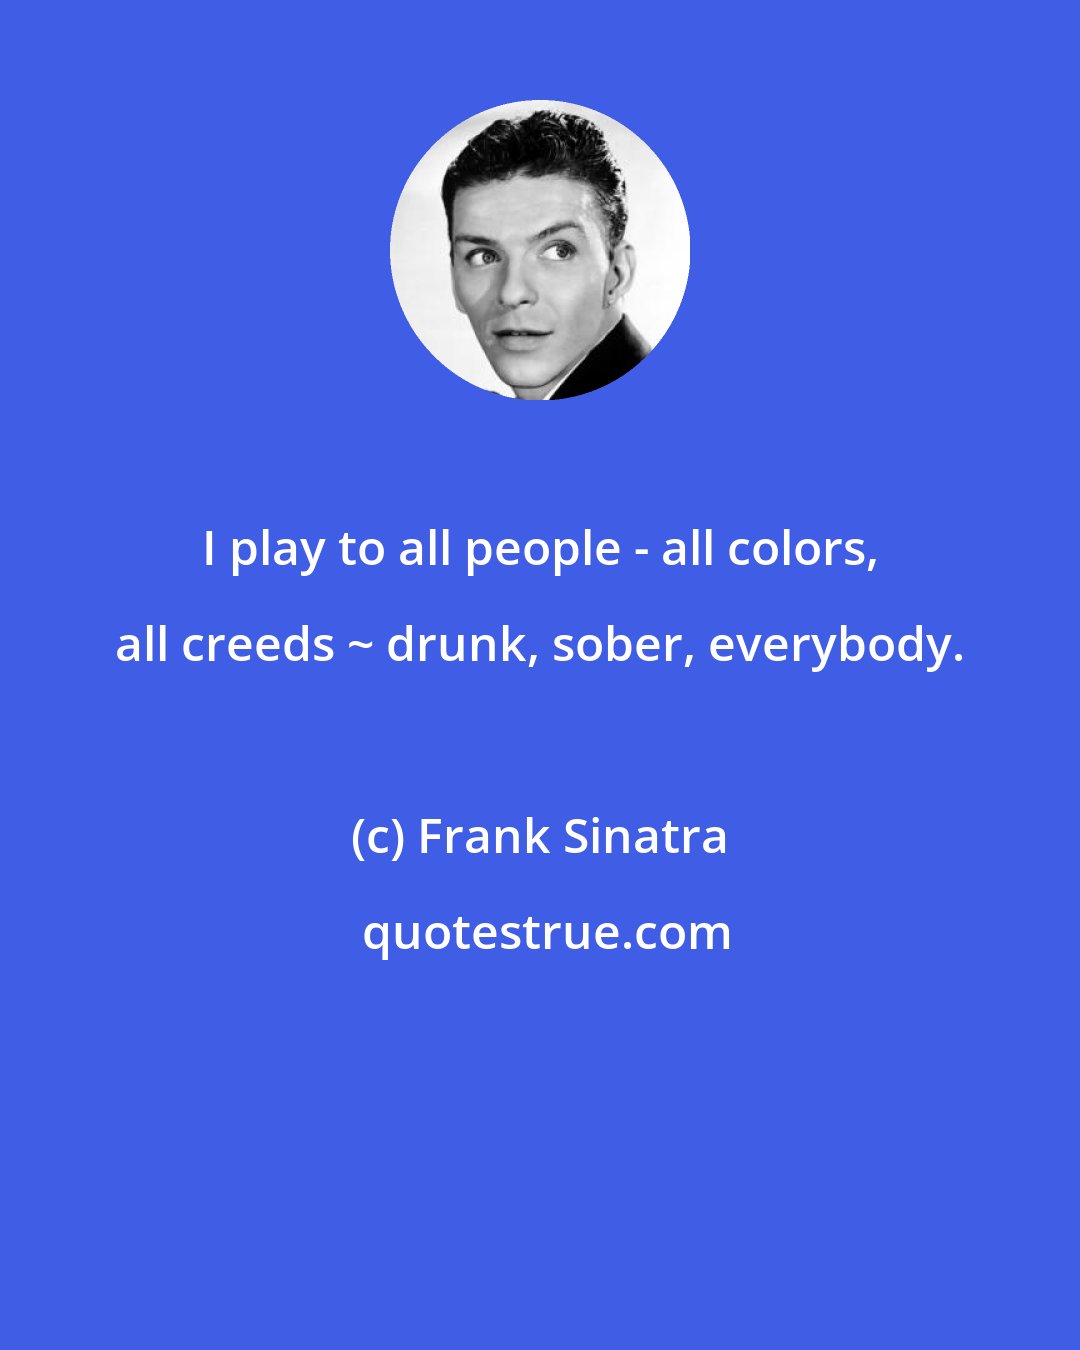 Frank Sinatra: I play to all people - all colors, all creeds ~ drunk, sober, everybody.